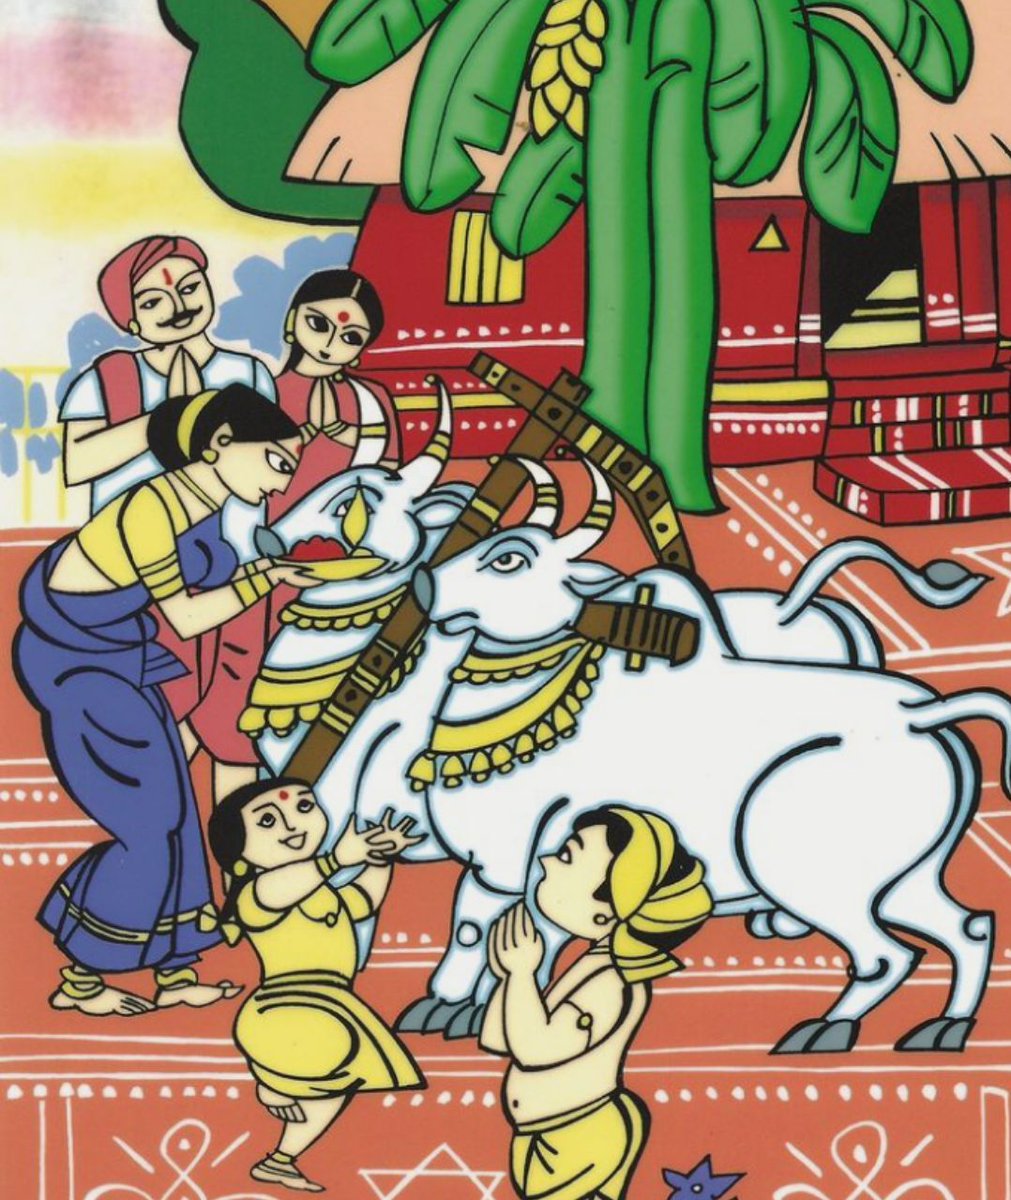 Still today some people give there first Chapati to cow. Almost all Hindu temples consists sculptures of cow. Even our are deities has special place for whether it is Krishna or Shiva. It is Also mentioned that all deities reside in the body of cow.